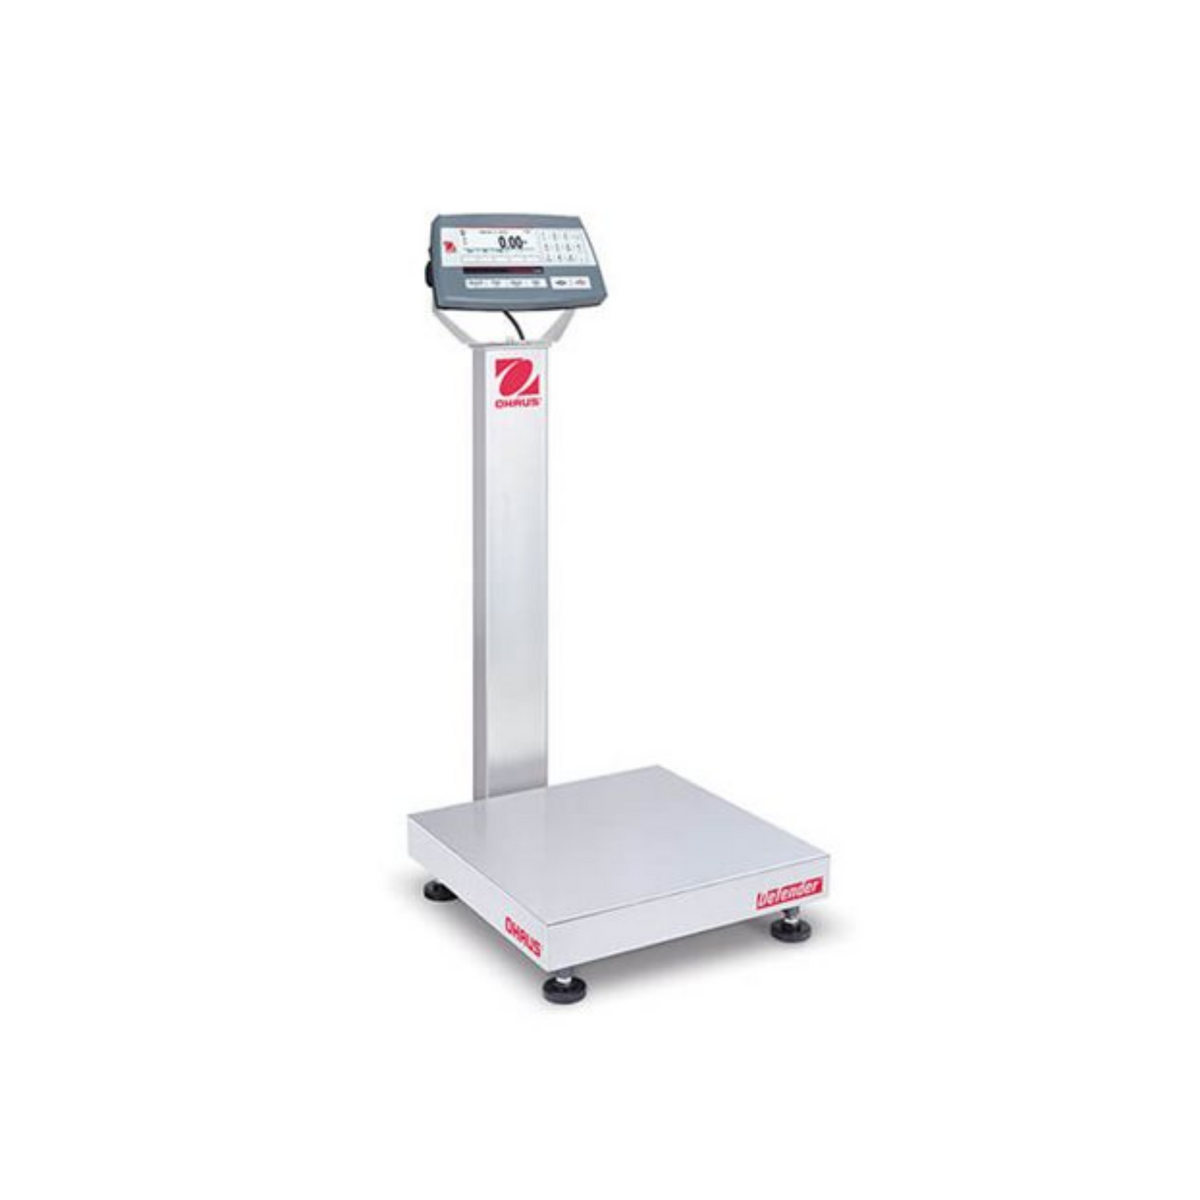 Ohaus Bench Scale: Defender 5000 Model-Legal For Trade